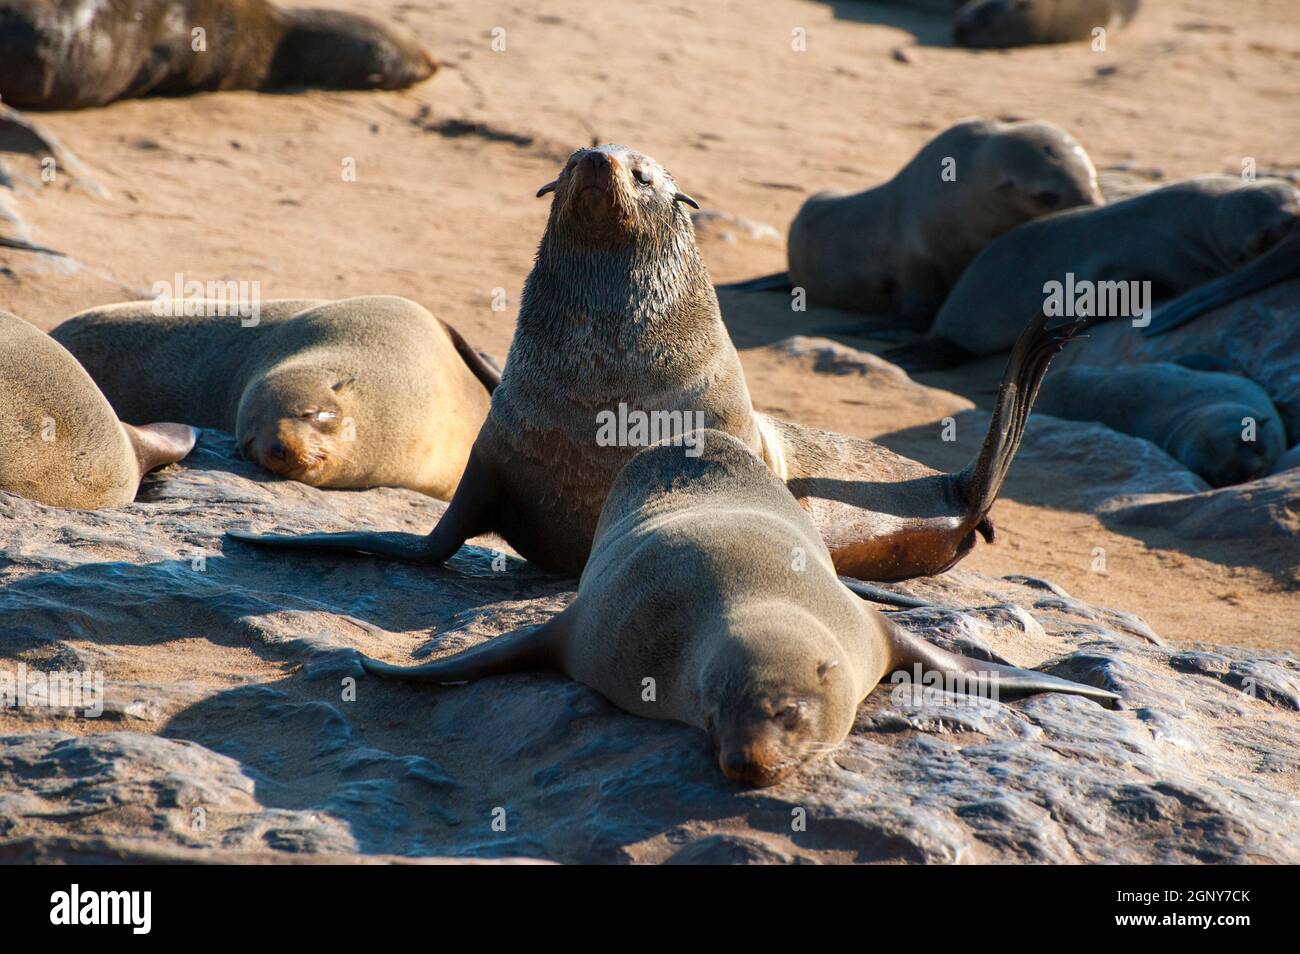 Cape fur seal (Arctocephalus pusillus). The female (cow) is smaller and lighter coloured than the male (bull). The Cape, or South African, fur seal fe Stock Photo